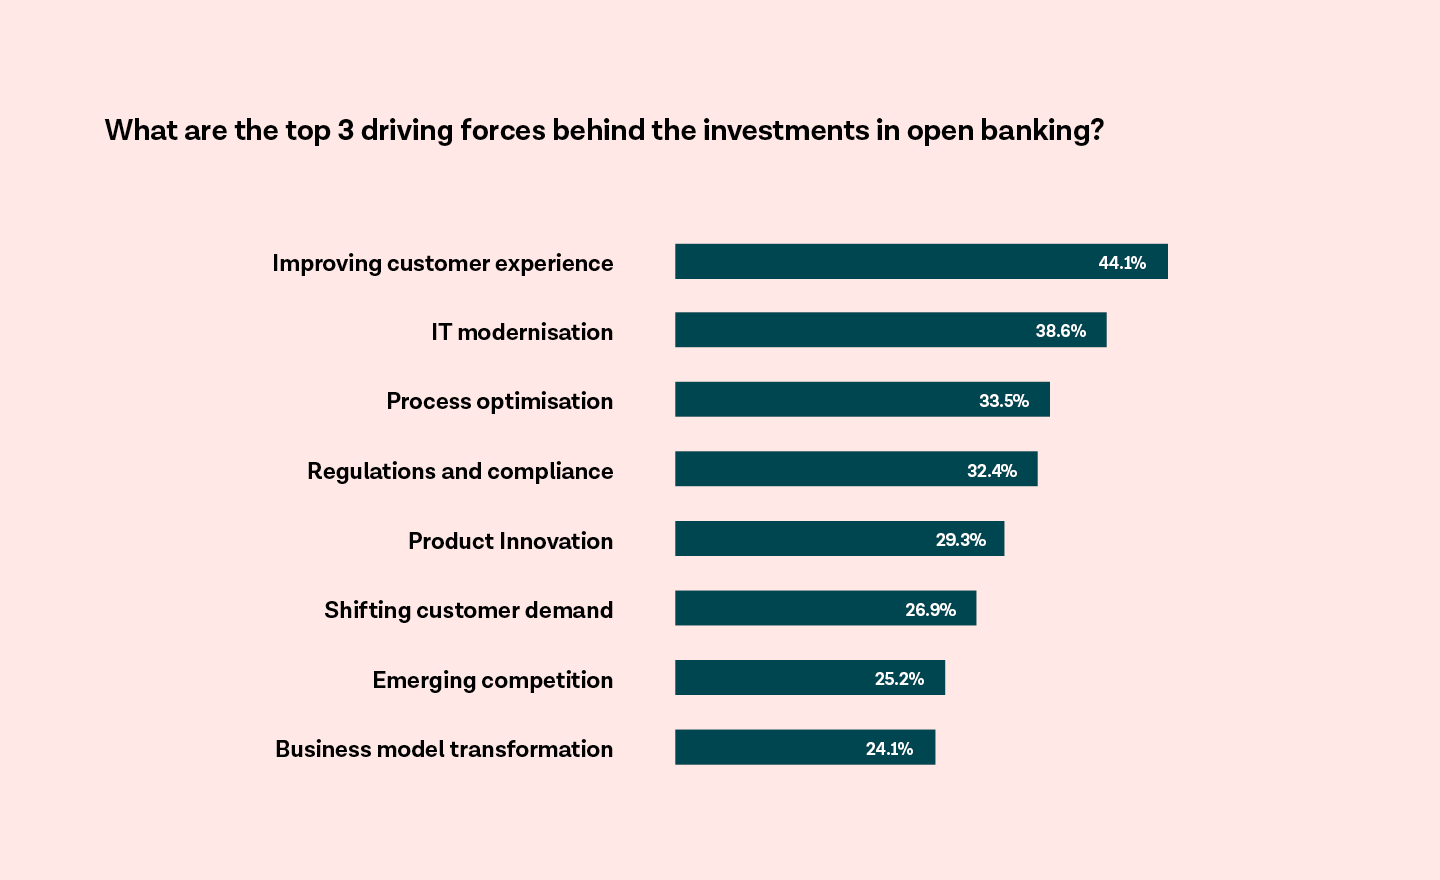 The top 3 driving forces behind open banking investments